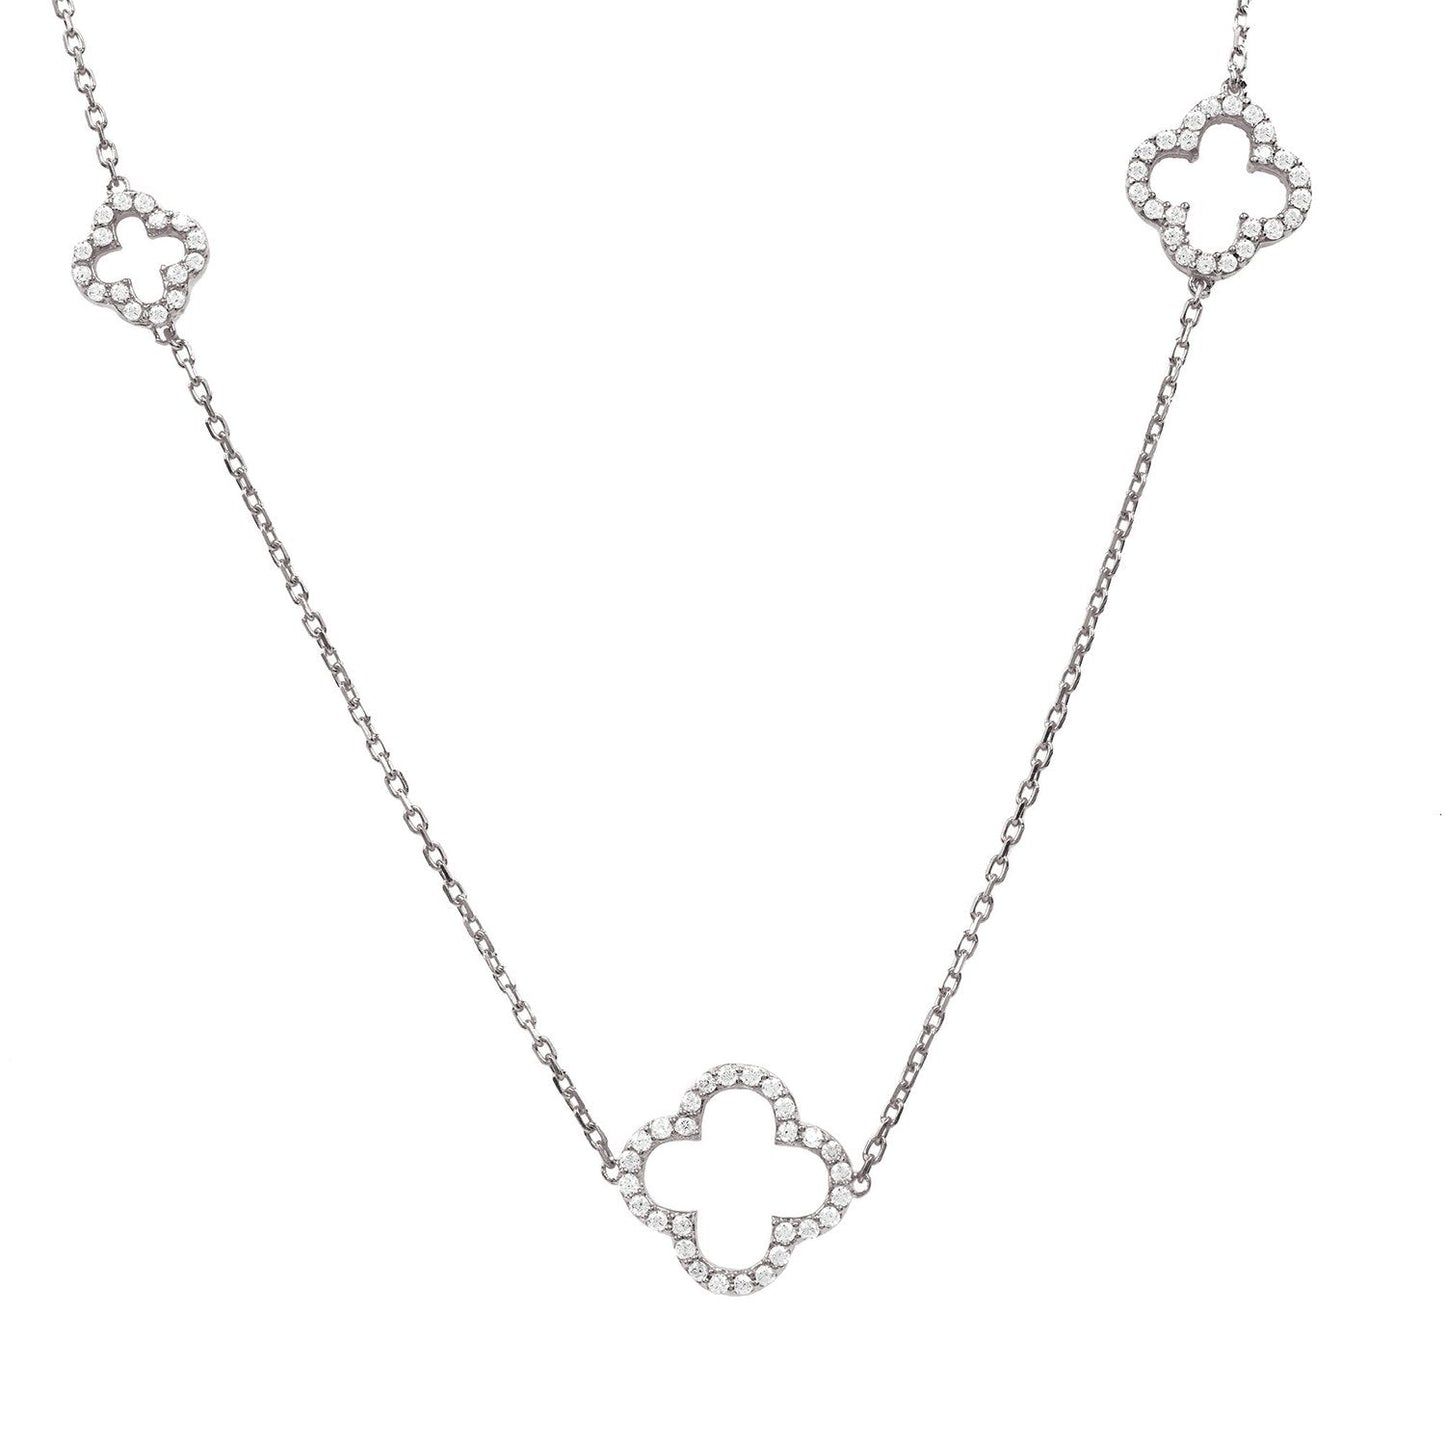 Open Clover Long White Cz Necklace Silver - Allure SocietyNecklaces